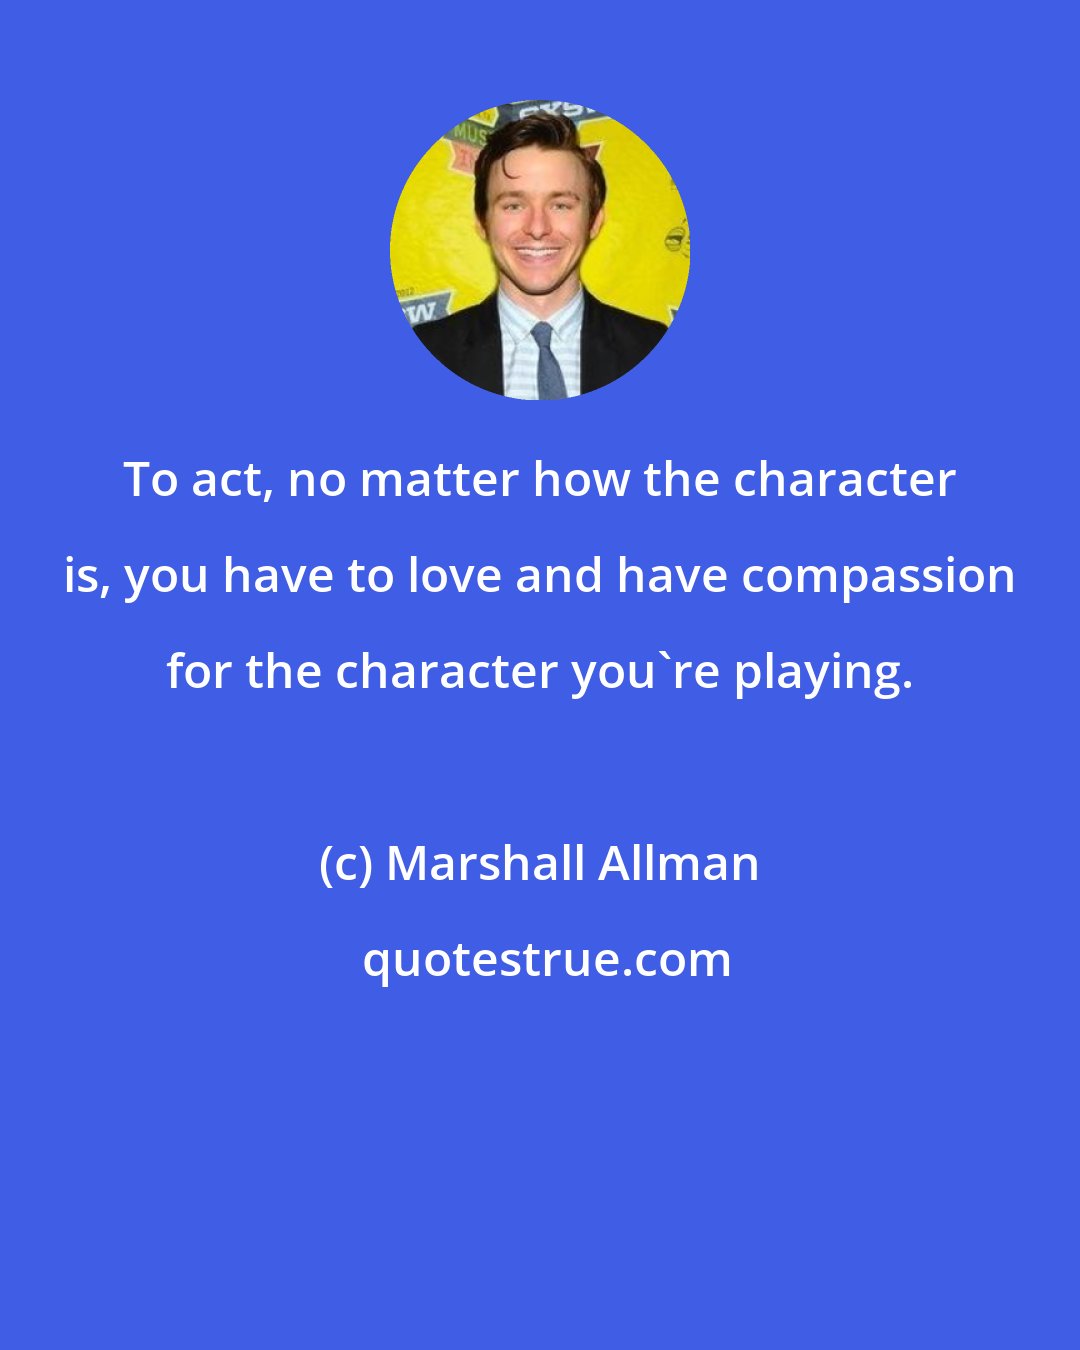 Marshall Allman: To act, no matter how the character is, you have to love and have compassion for the character you're playing.